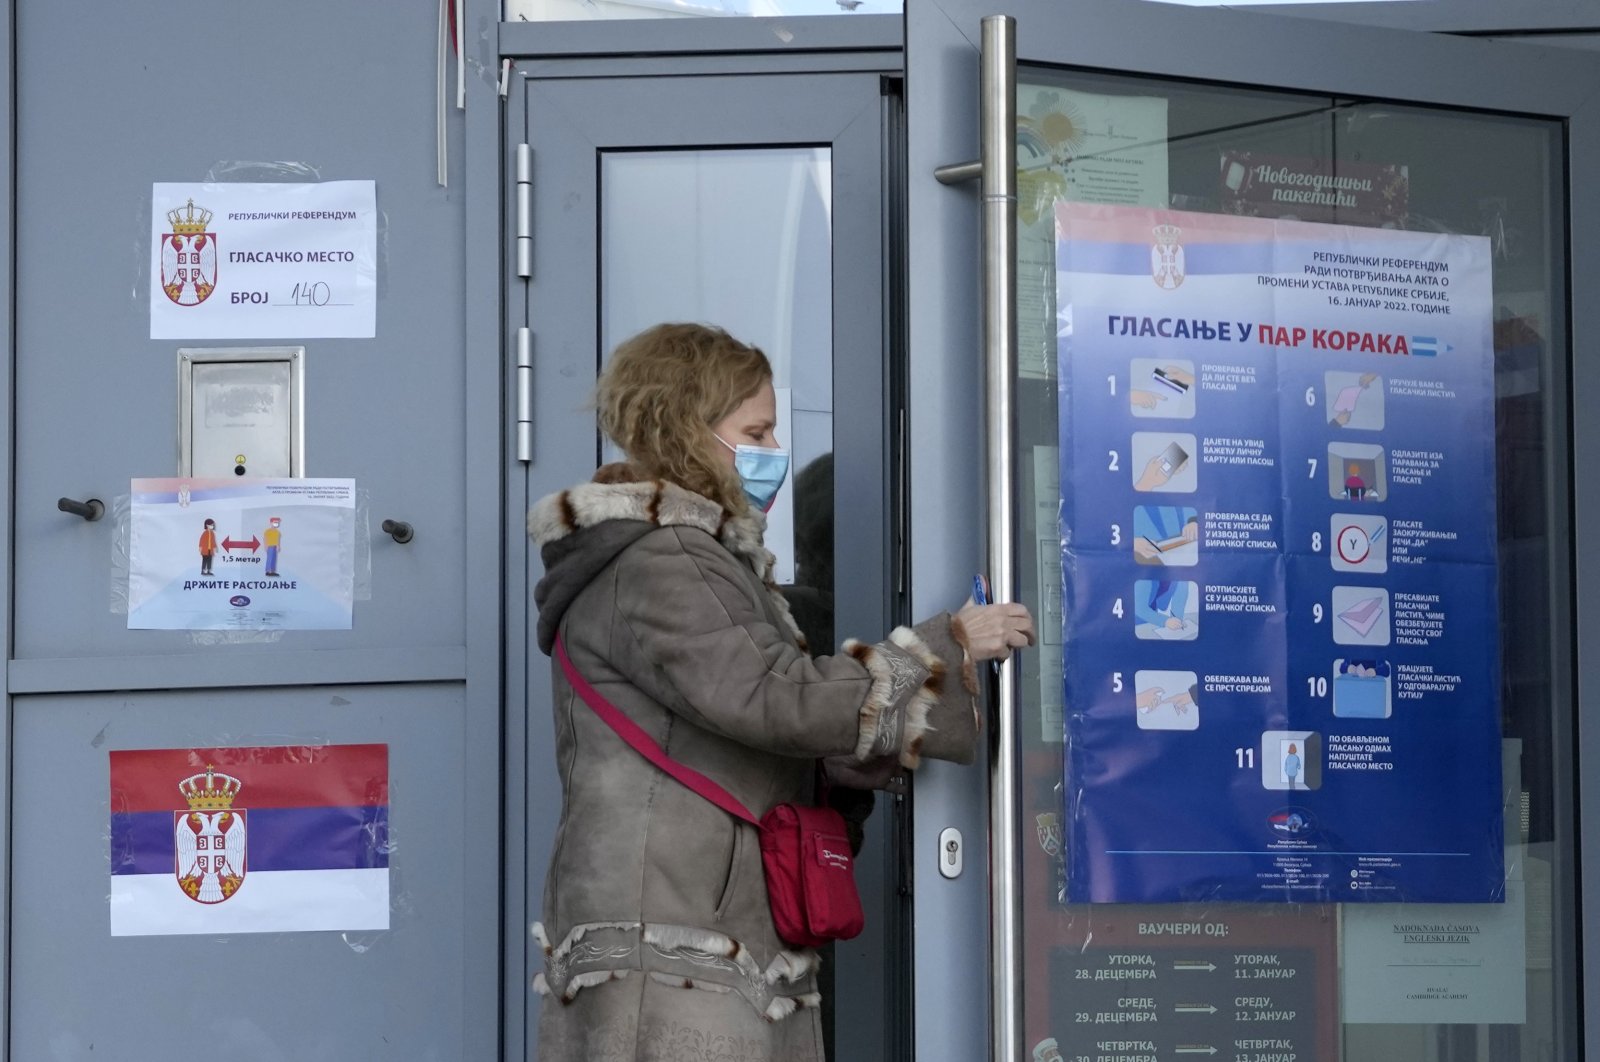 A woman arrives at a polling station to vote in a referendum on constitutional changes in Belgrade, Serbia, Jan. 16, 2022. (AP Photo)